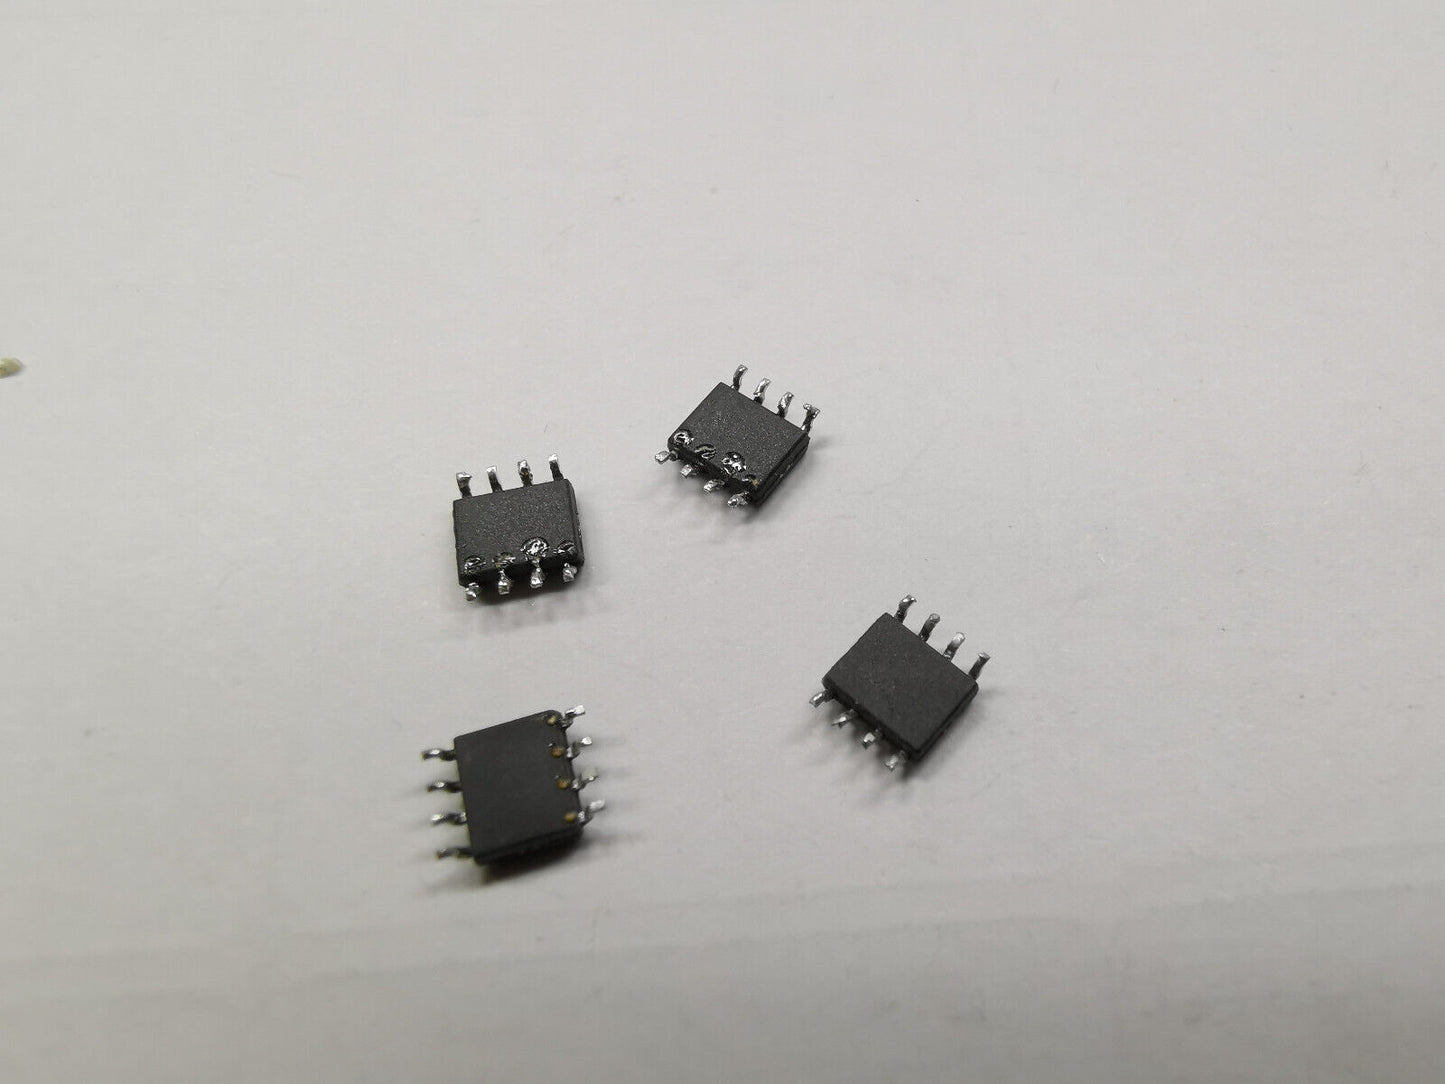 4pcs Genuine AD8009 Low Distortion High Speed Operational Amplifier  1 GHz